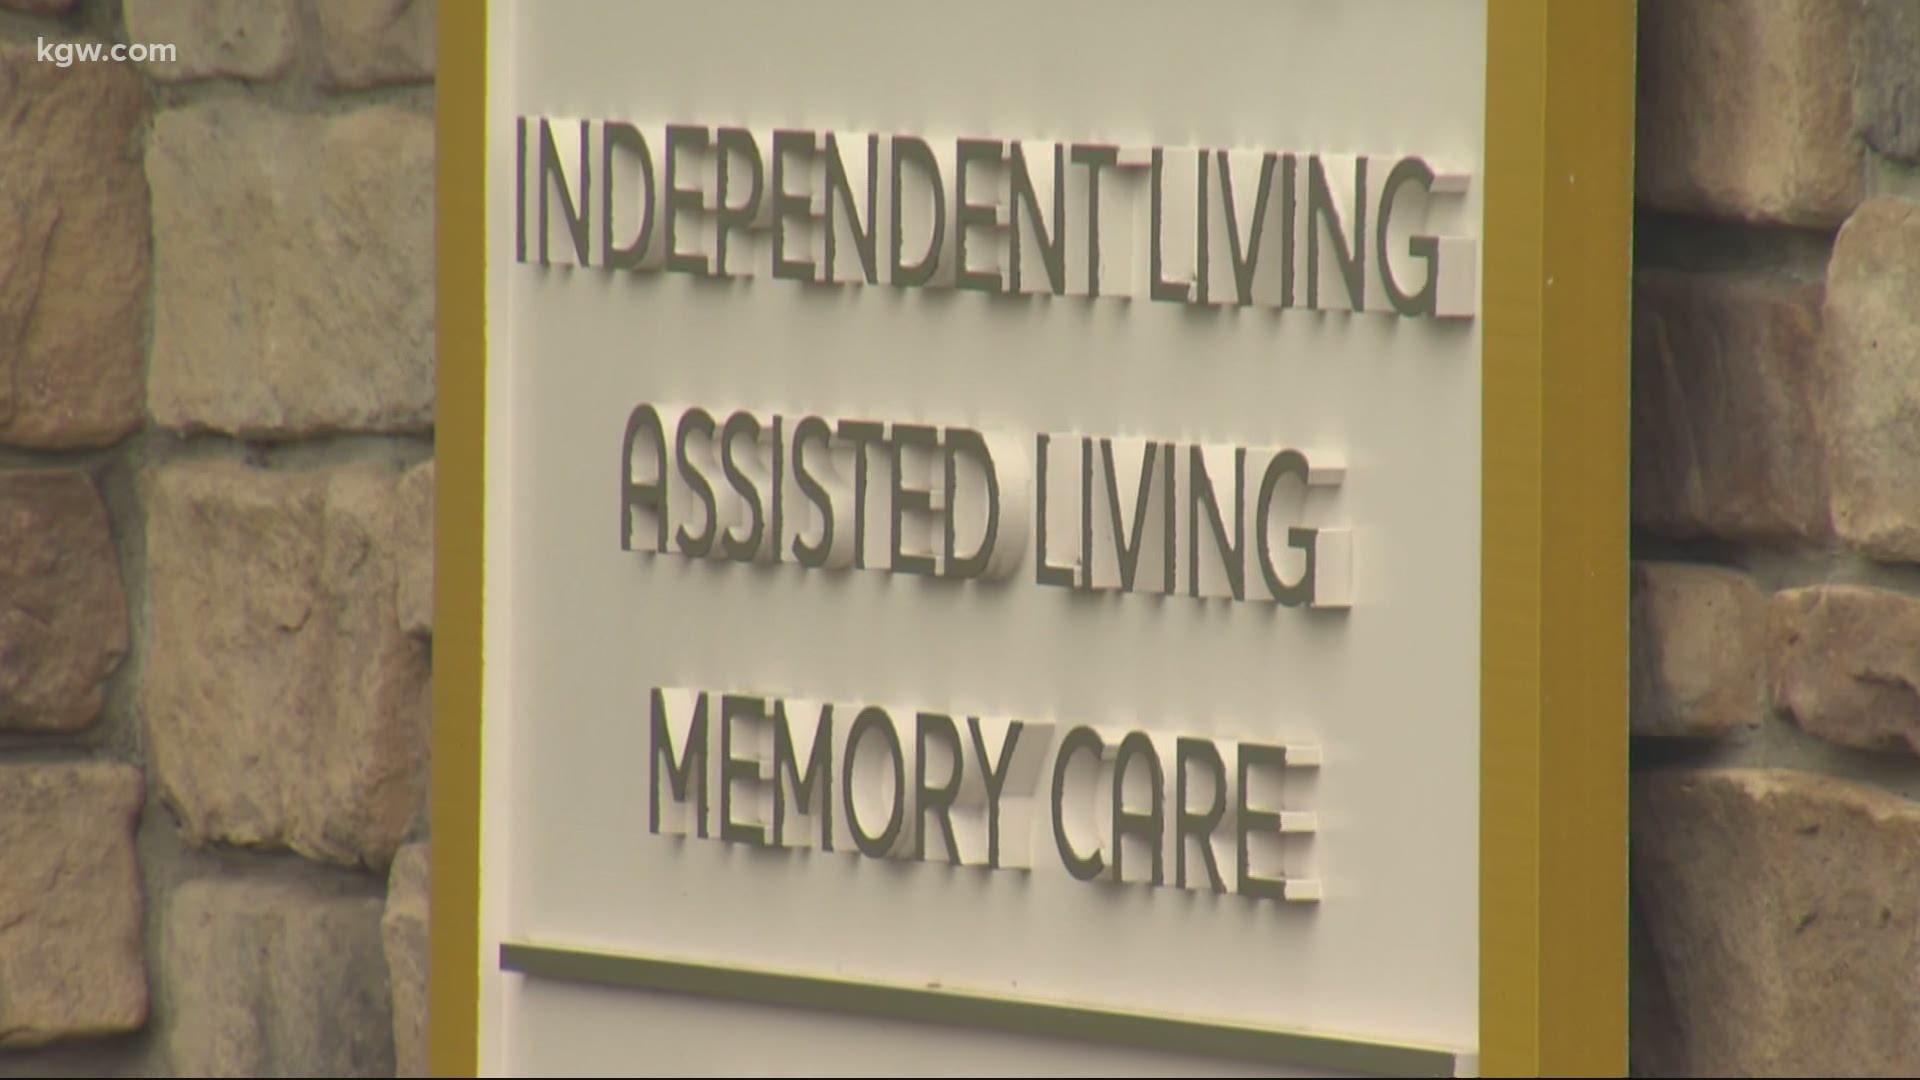 Next week you may be able to visit loved ones inside long-term care facilities. Galen Ettlin reports on what that will look like.